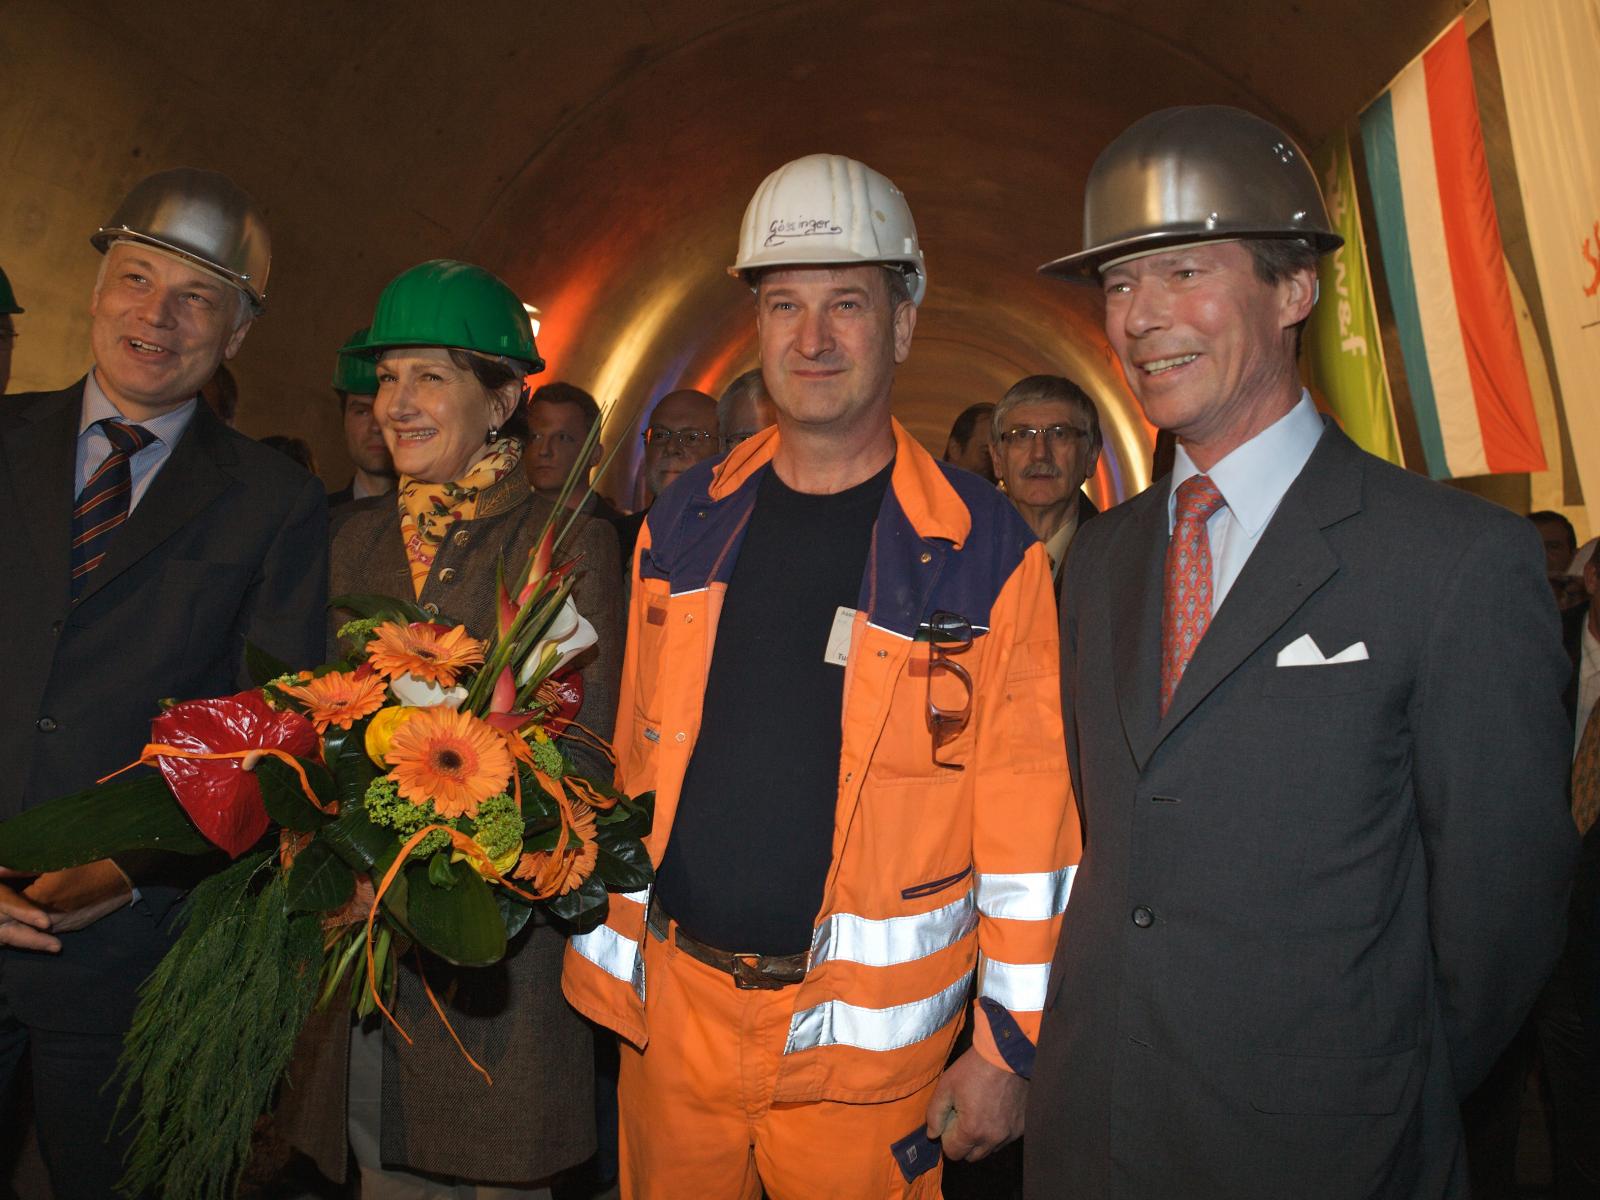 Opening of the Stafelter Tunnel